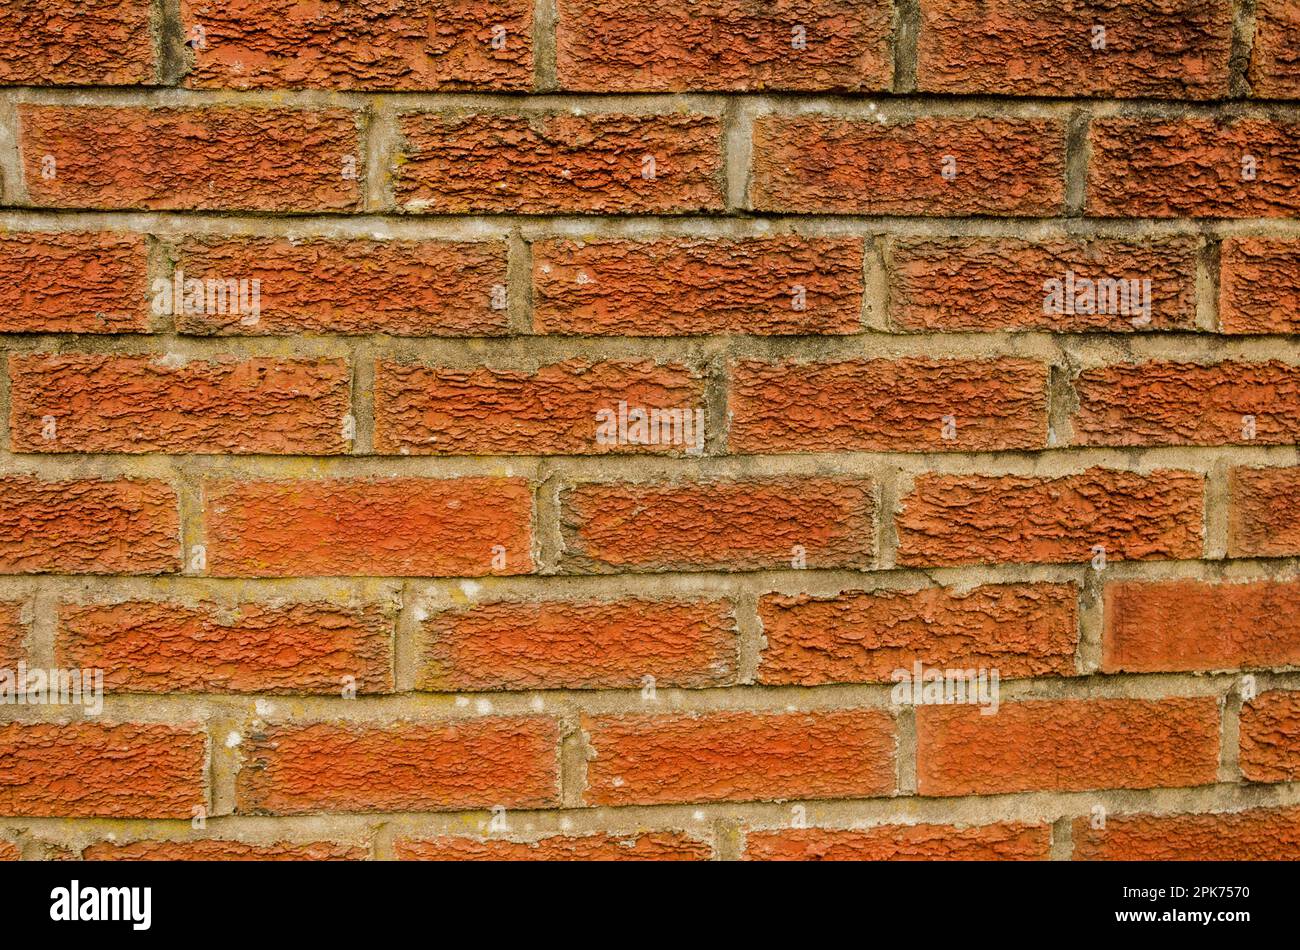 Background of a brick wall Stock Photo